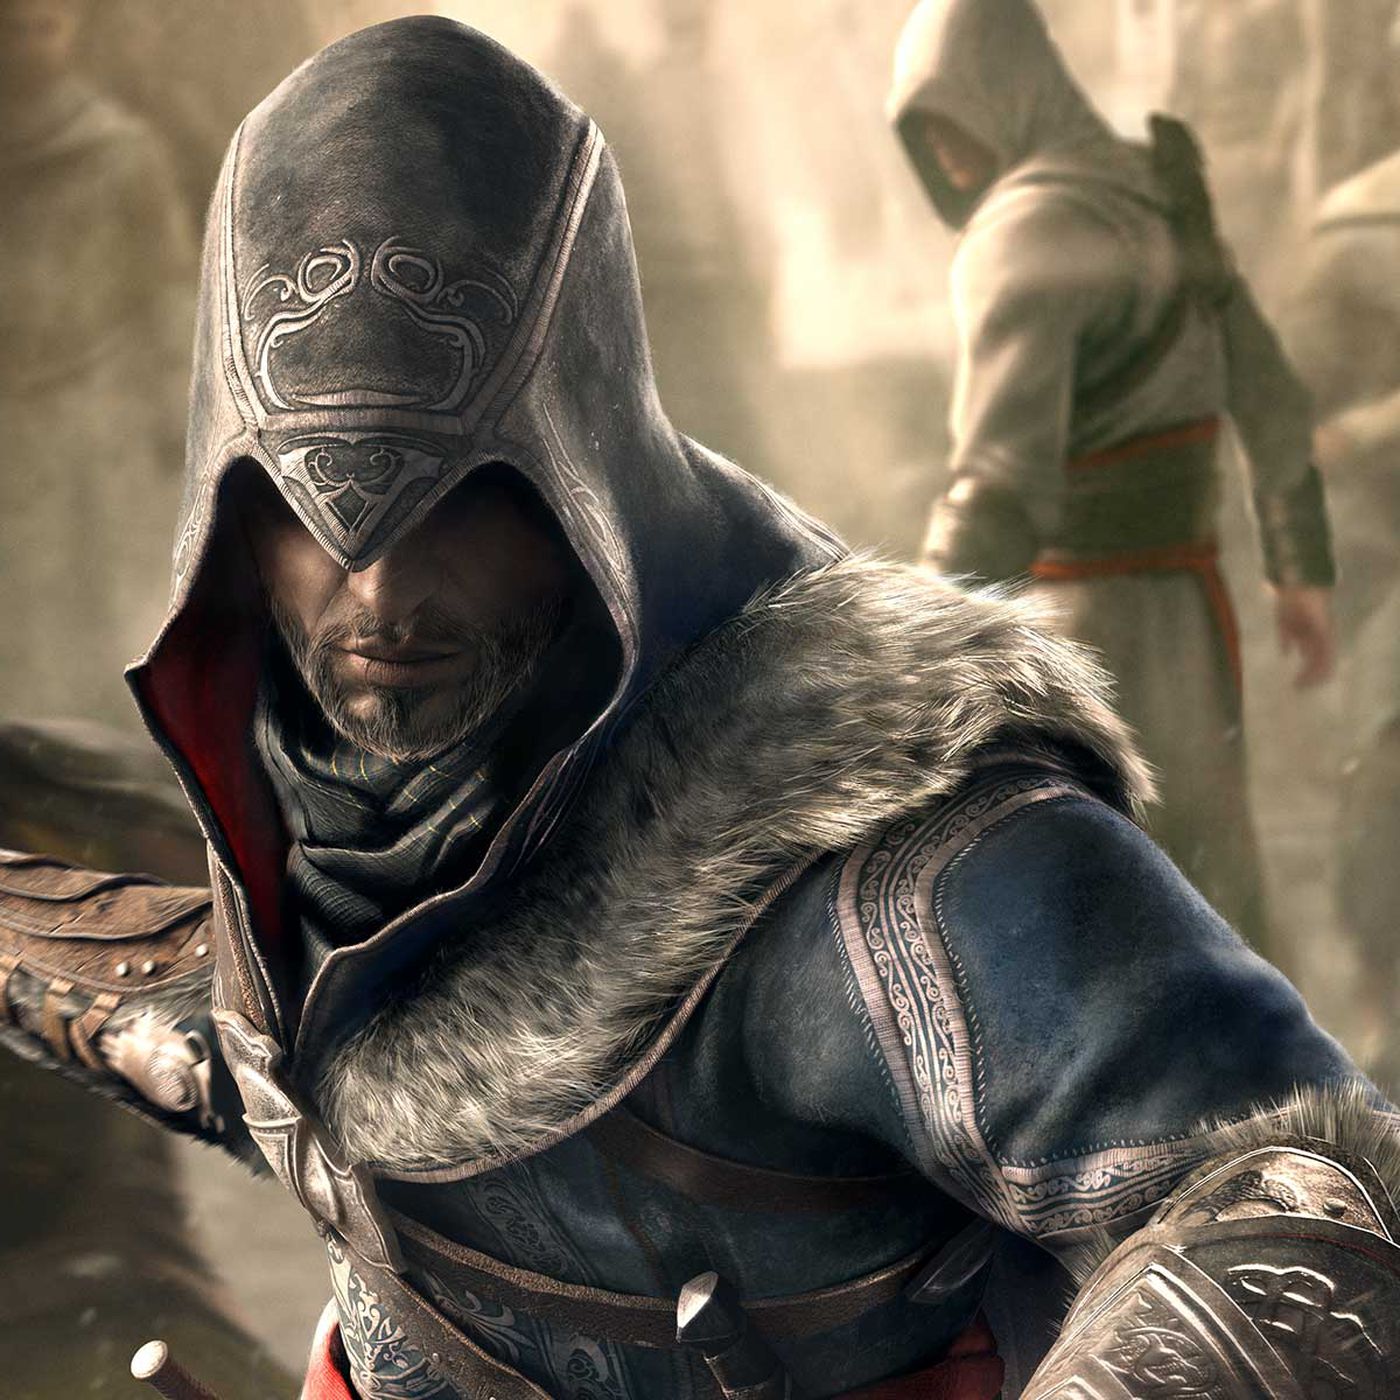 Where to play Assassin's Creed games for 'free' - Polygon